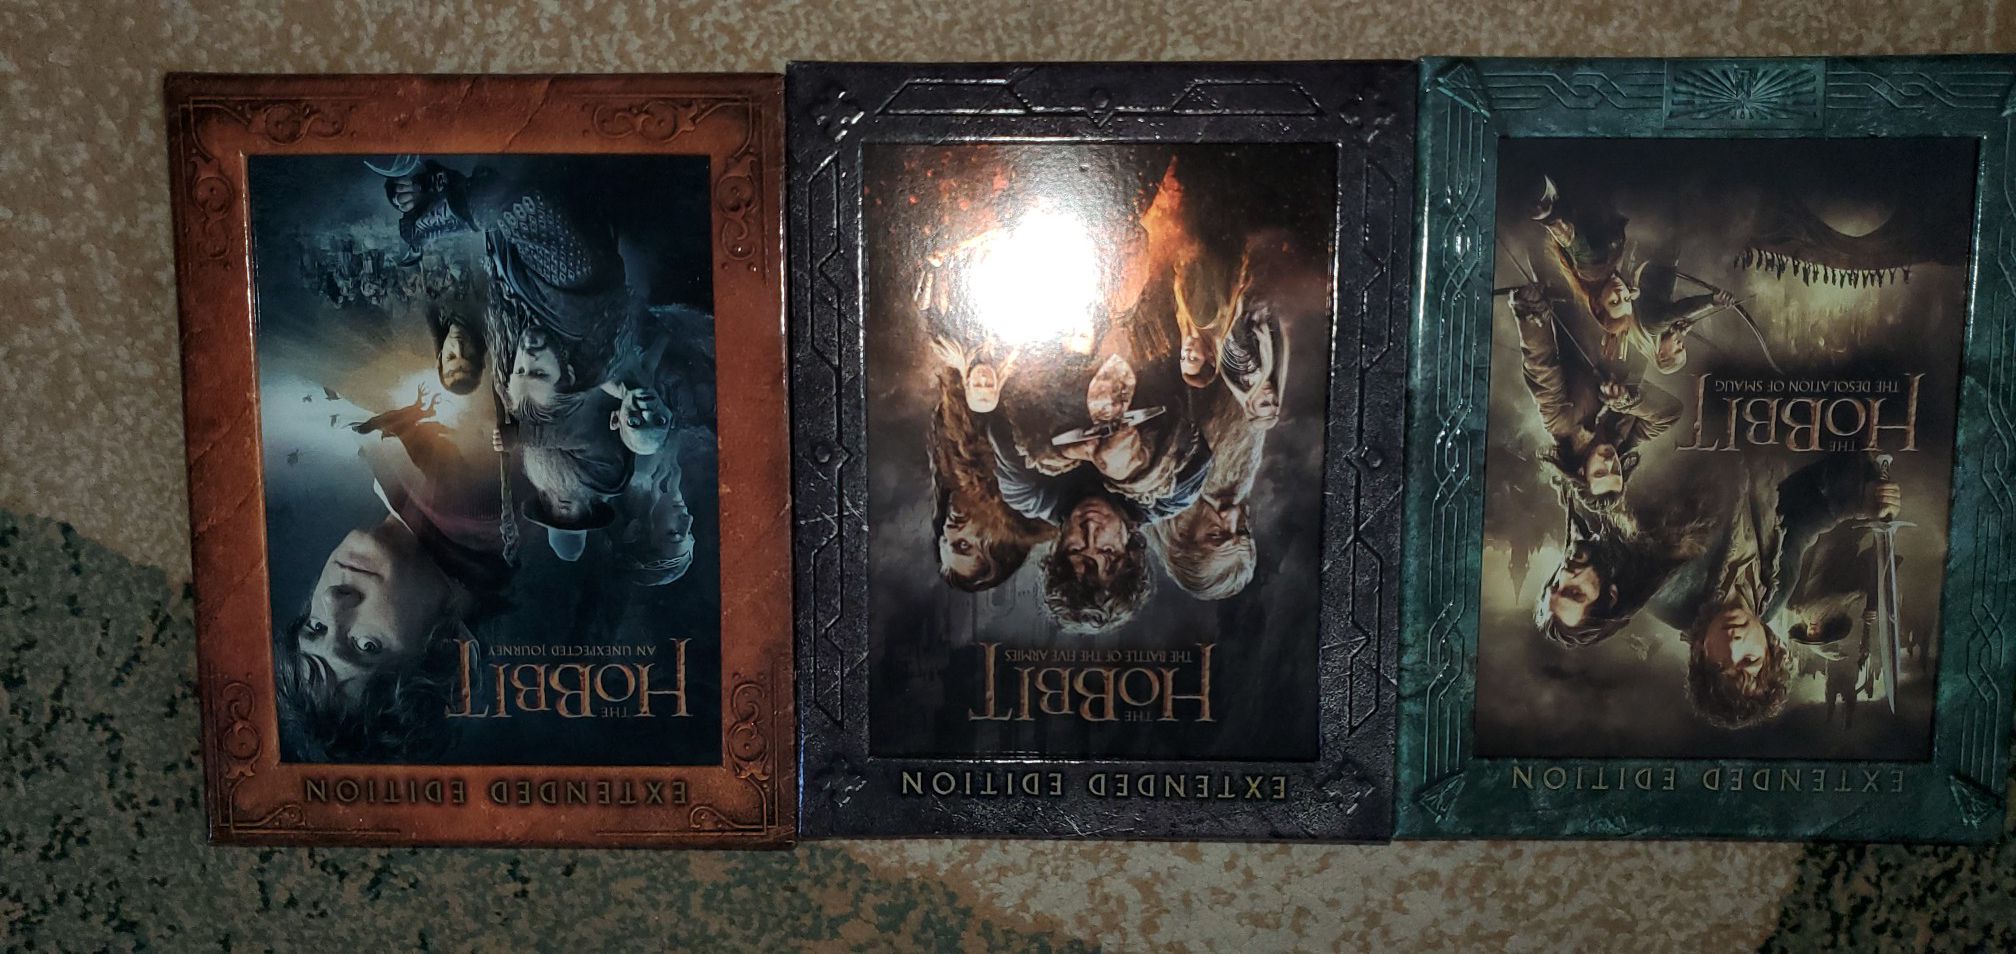 Lord of the Rings and The Hobbit Extended version Blu-ray